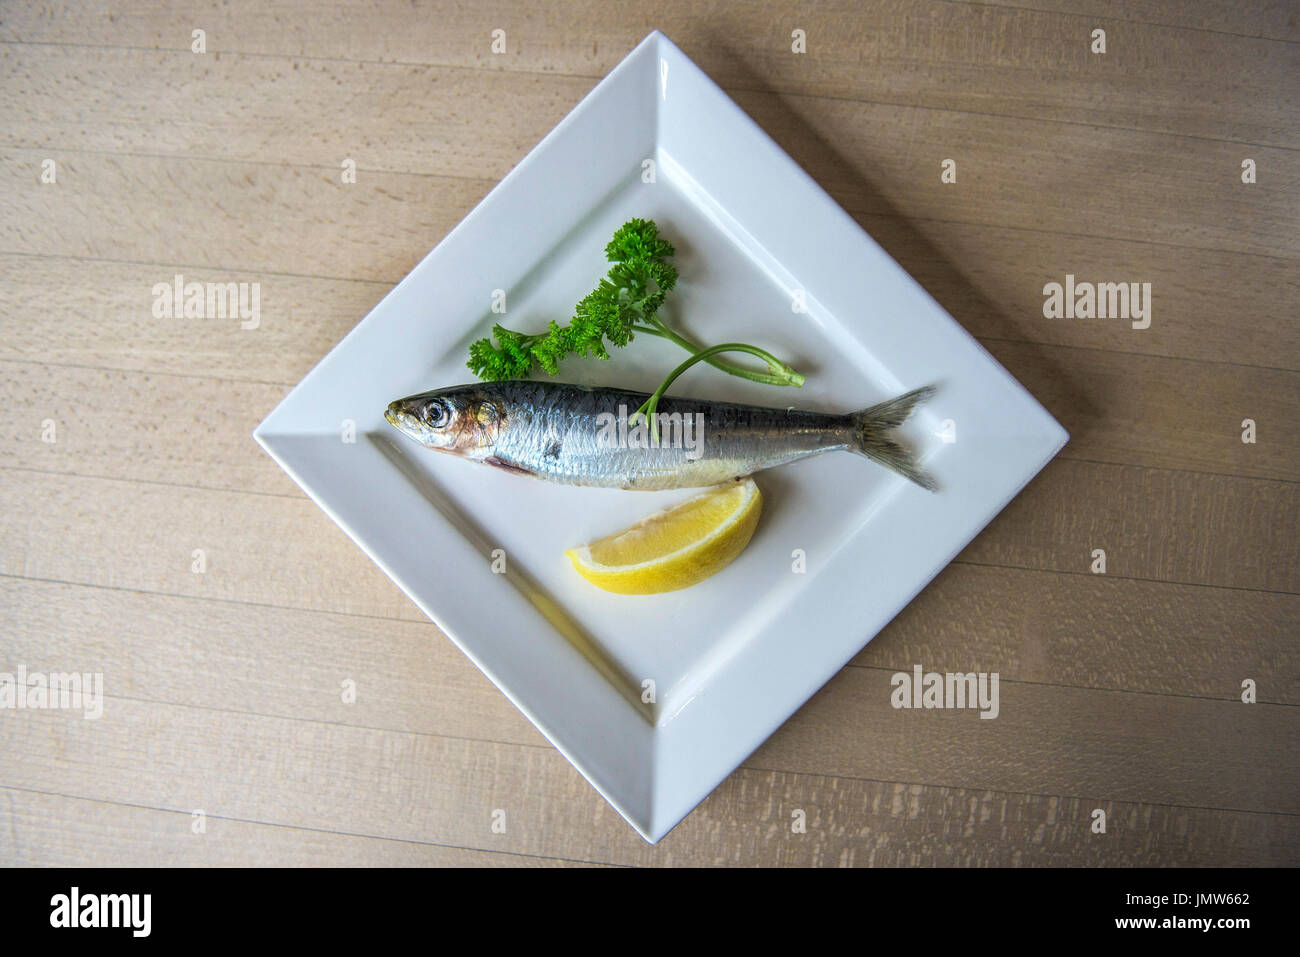 A sardine, sprig of parsley and a wedge of lemon on a plate. Stock Photo